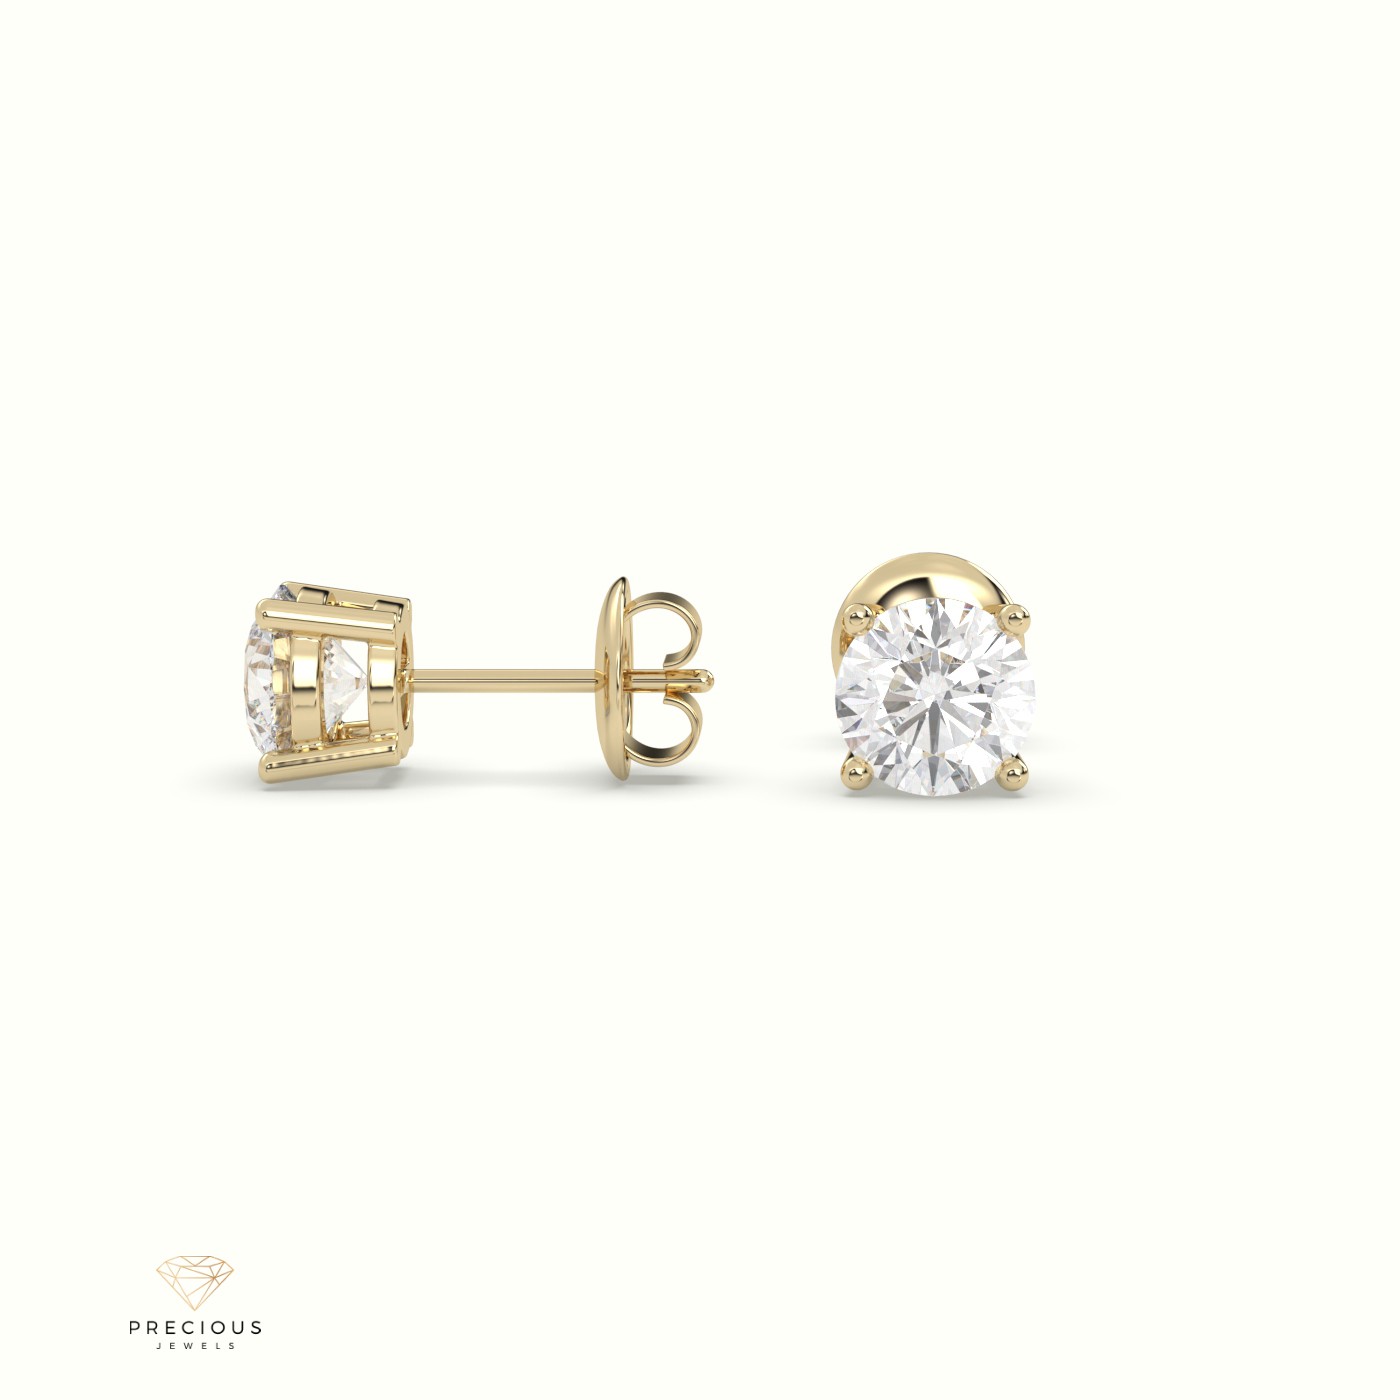 18k yellow gold  4 prongs classic round diamond earring studs Photos & images